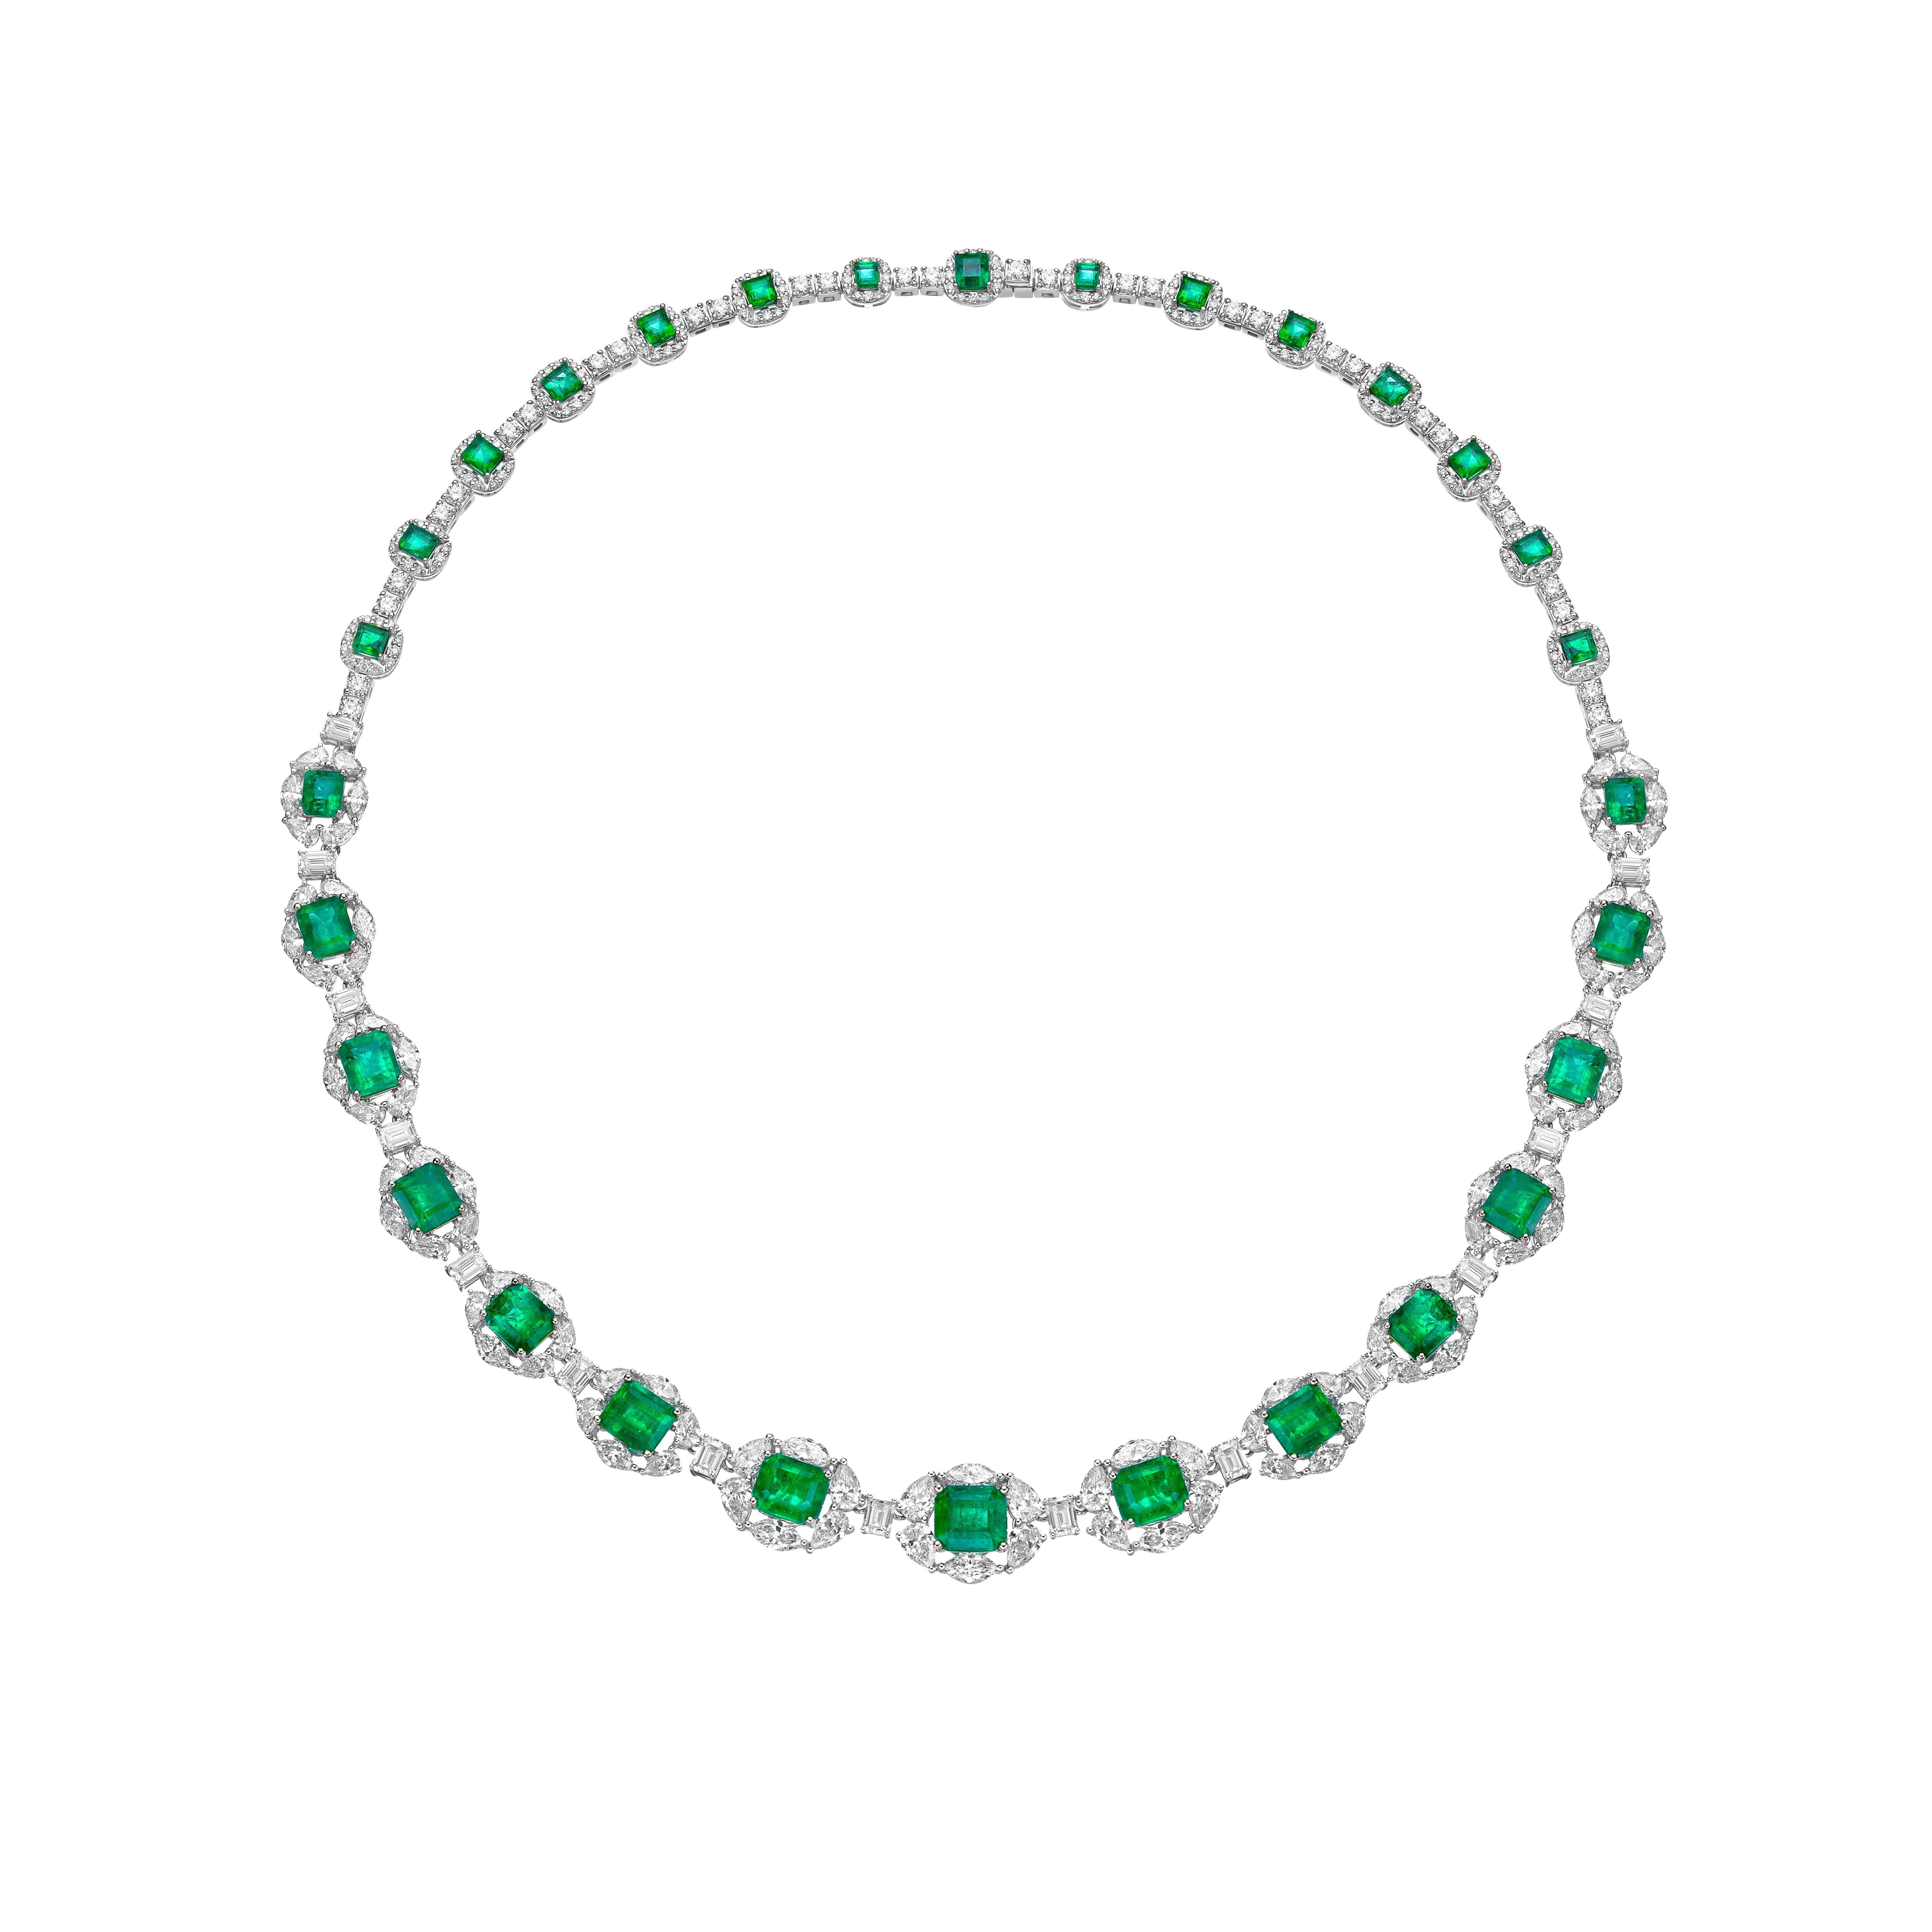 Radial Emeralds by Sunita Nahata Fine Design. This collection features vibrant green emeralds set on a bed of stunning White diamonds set in white gold. This is a dainty and delicate bridal necklace that still exudes a glamorous and luxurious